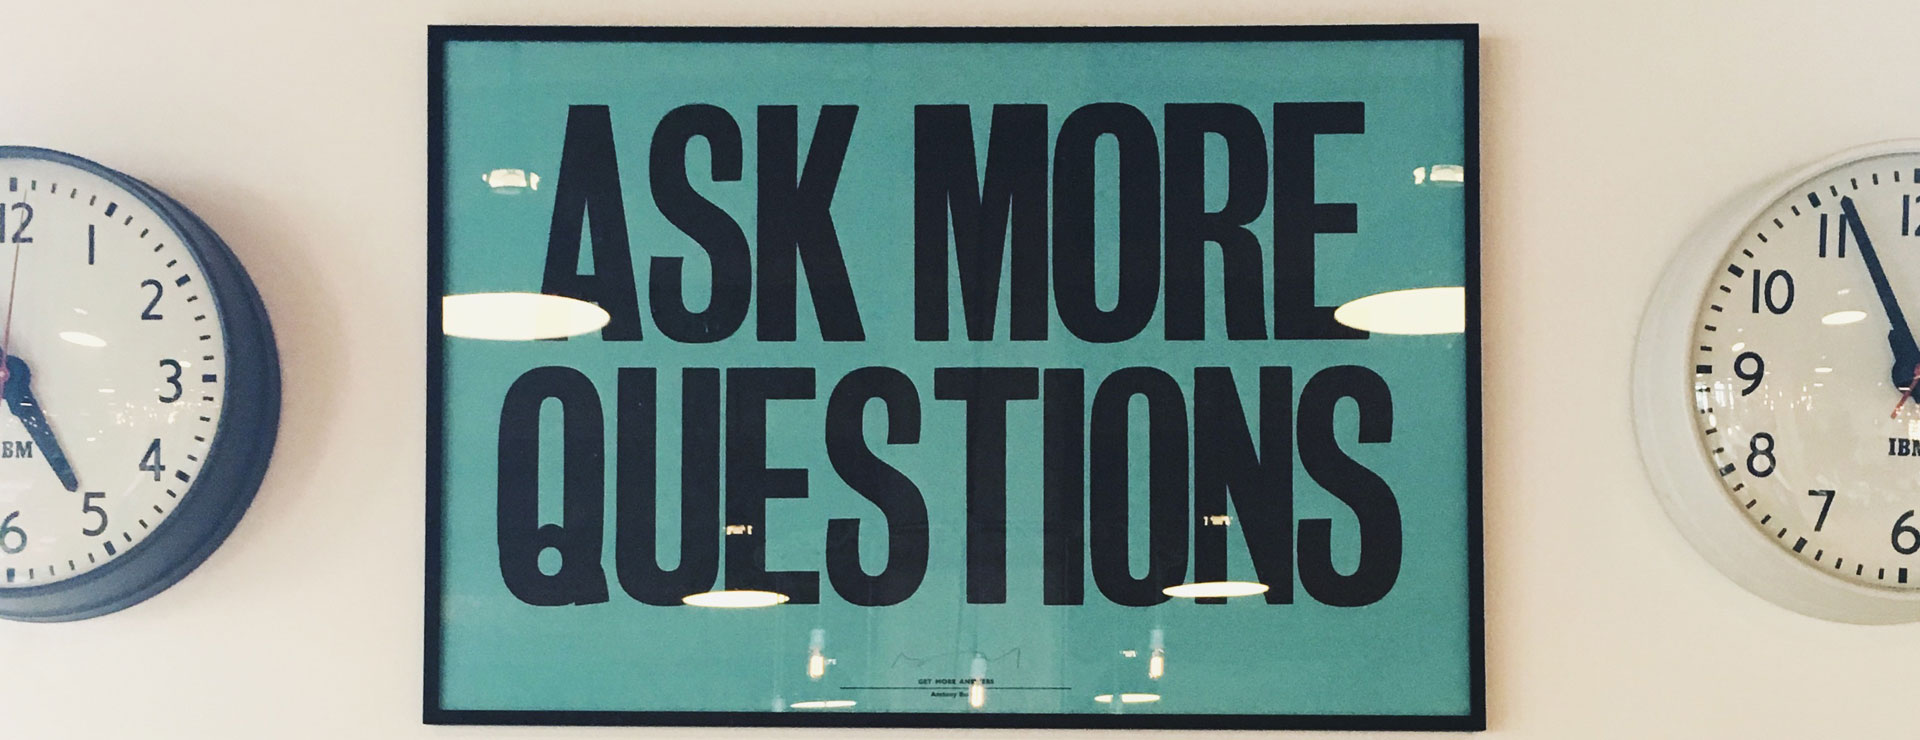 Poster "Ask more questions"